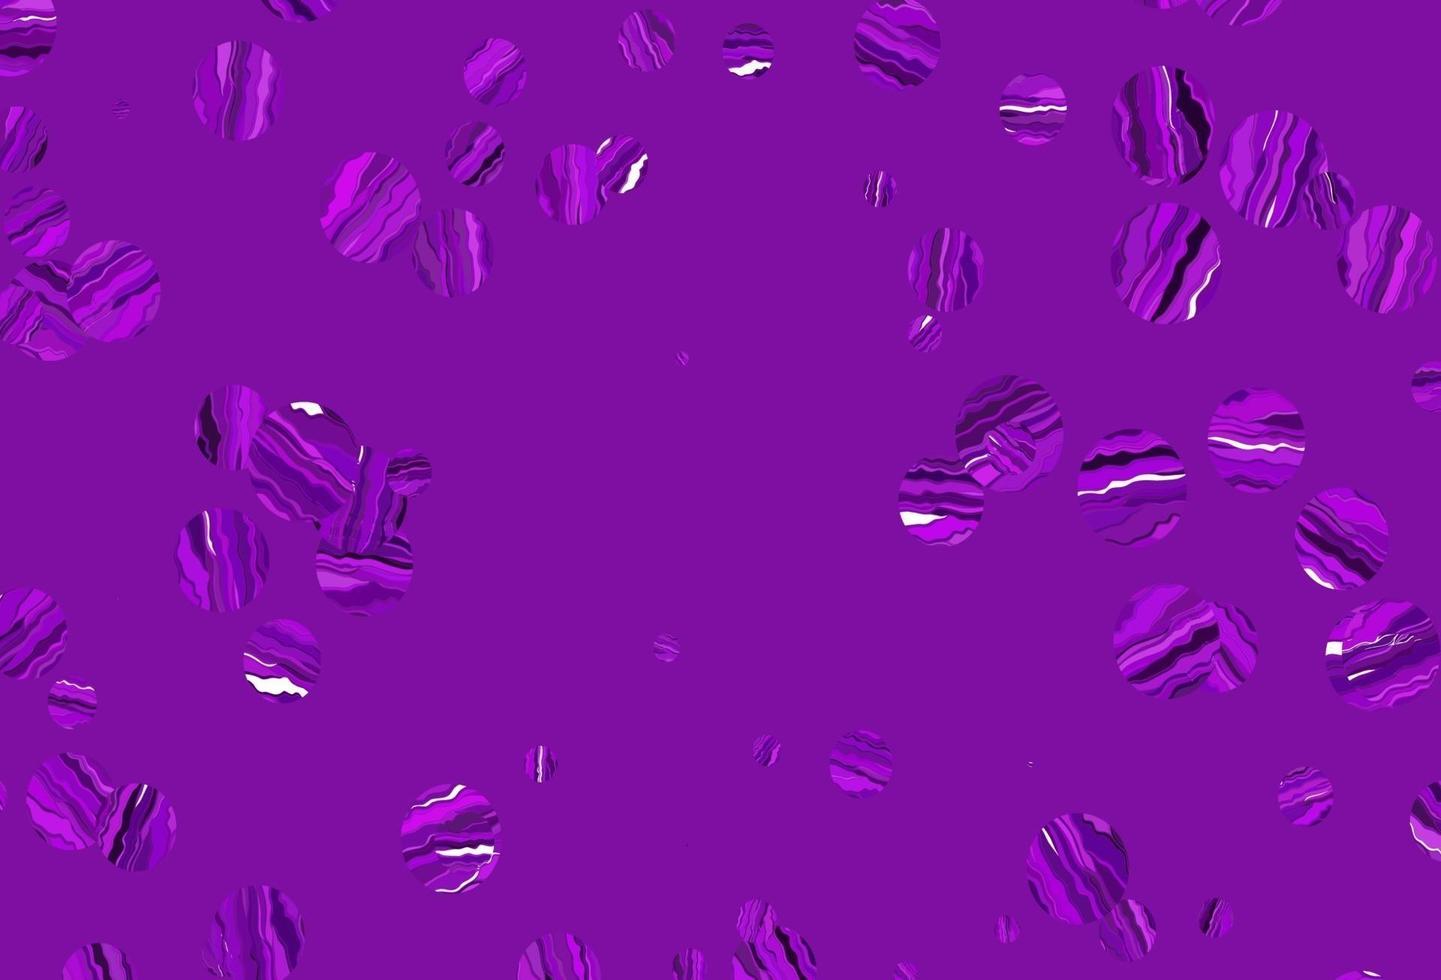 Light purple vector cover with spots.